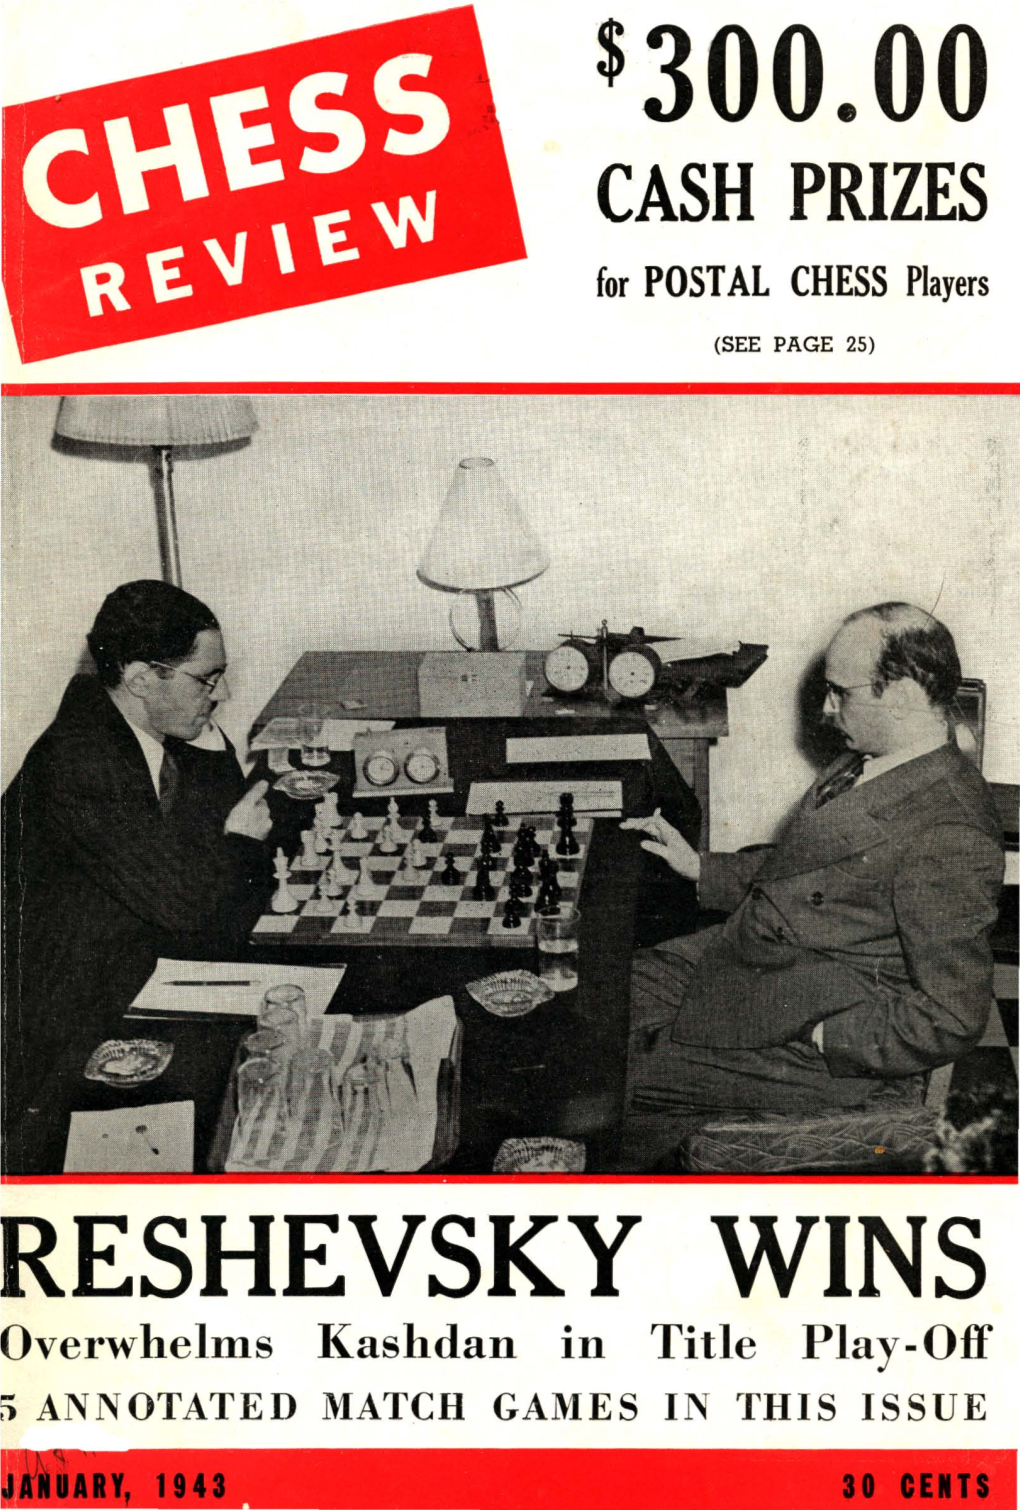 For POSTAL CHESS Players